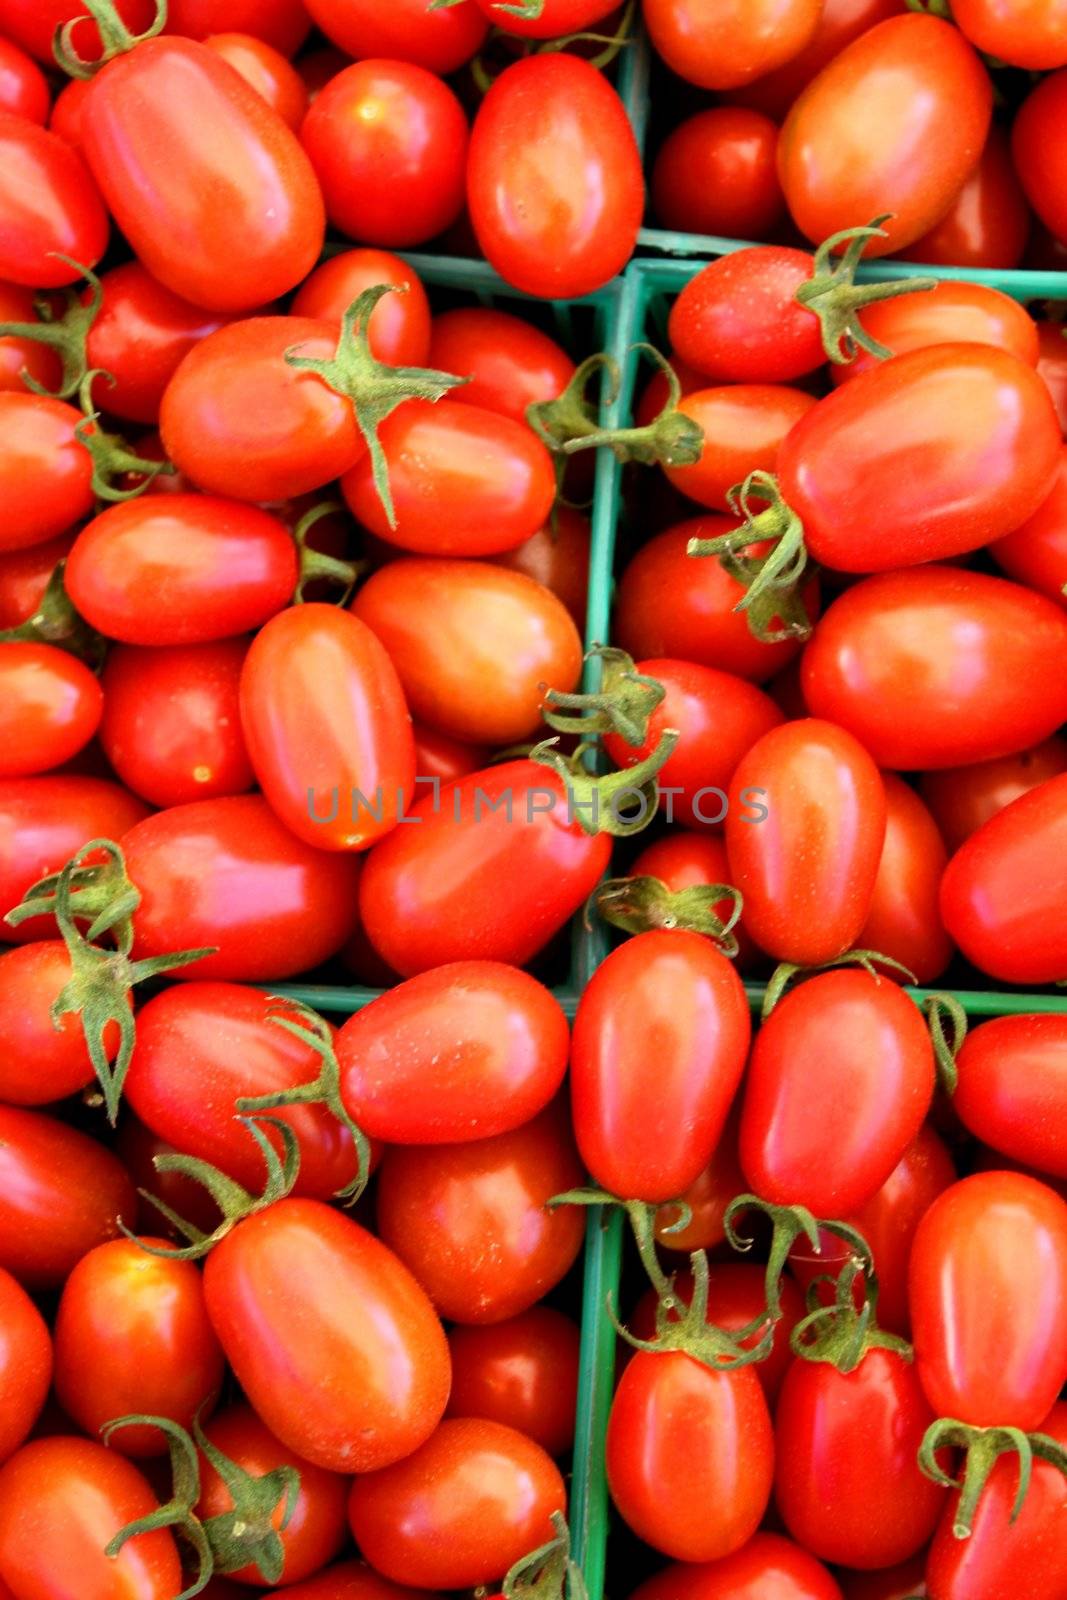 Baskets of red tomatoes at the farmers market